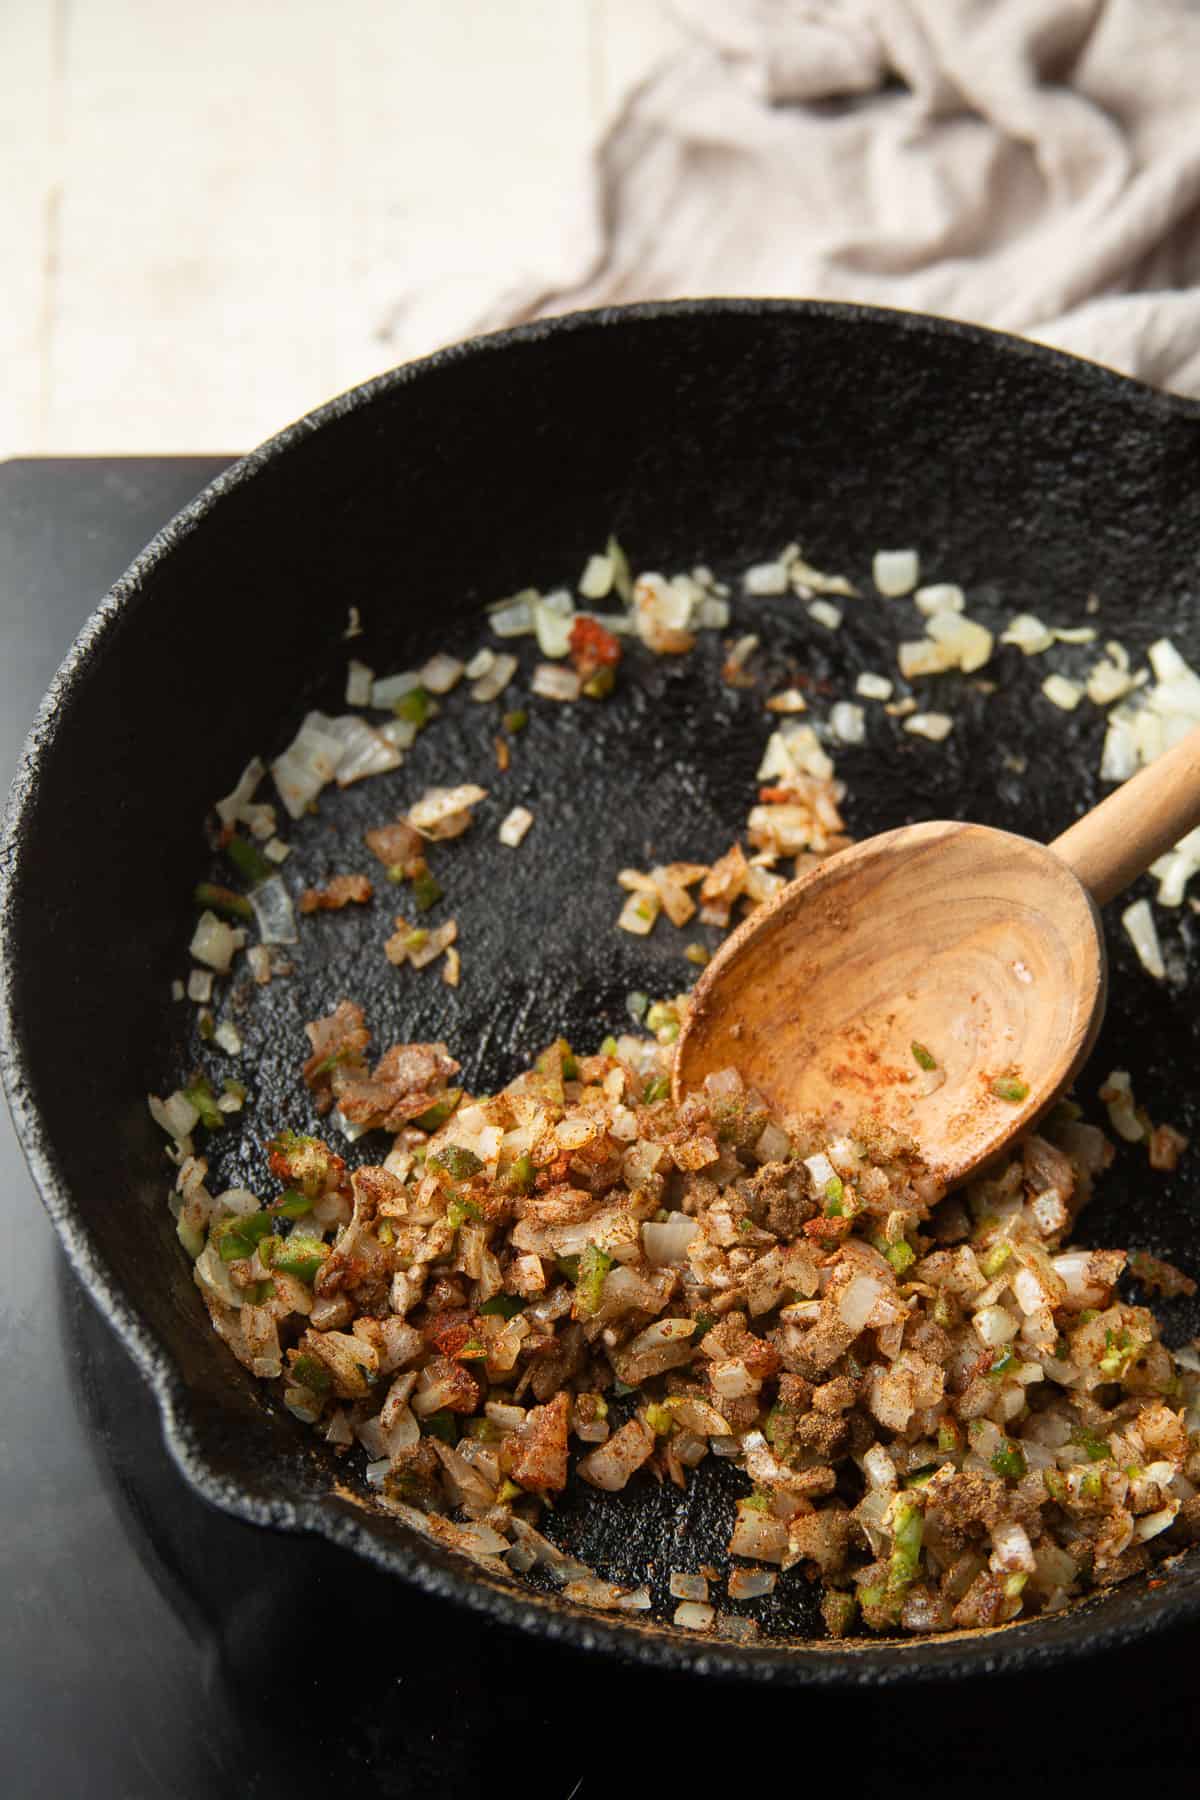 Onions, garlic, and spices cooking in a skillet.